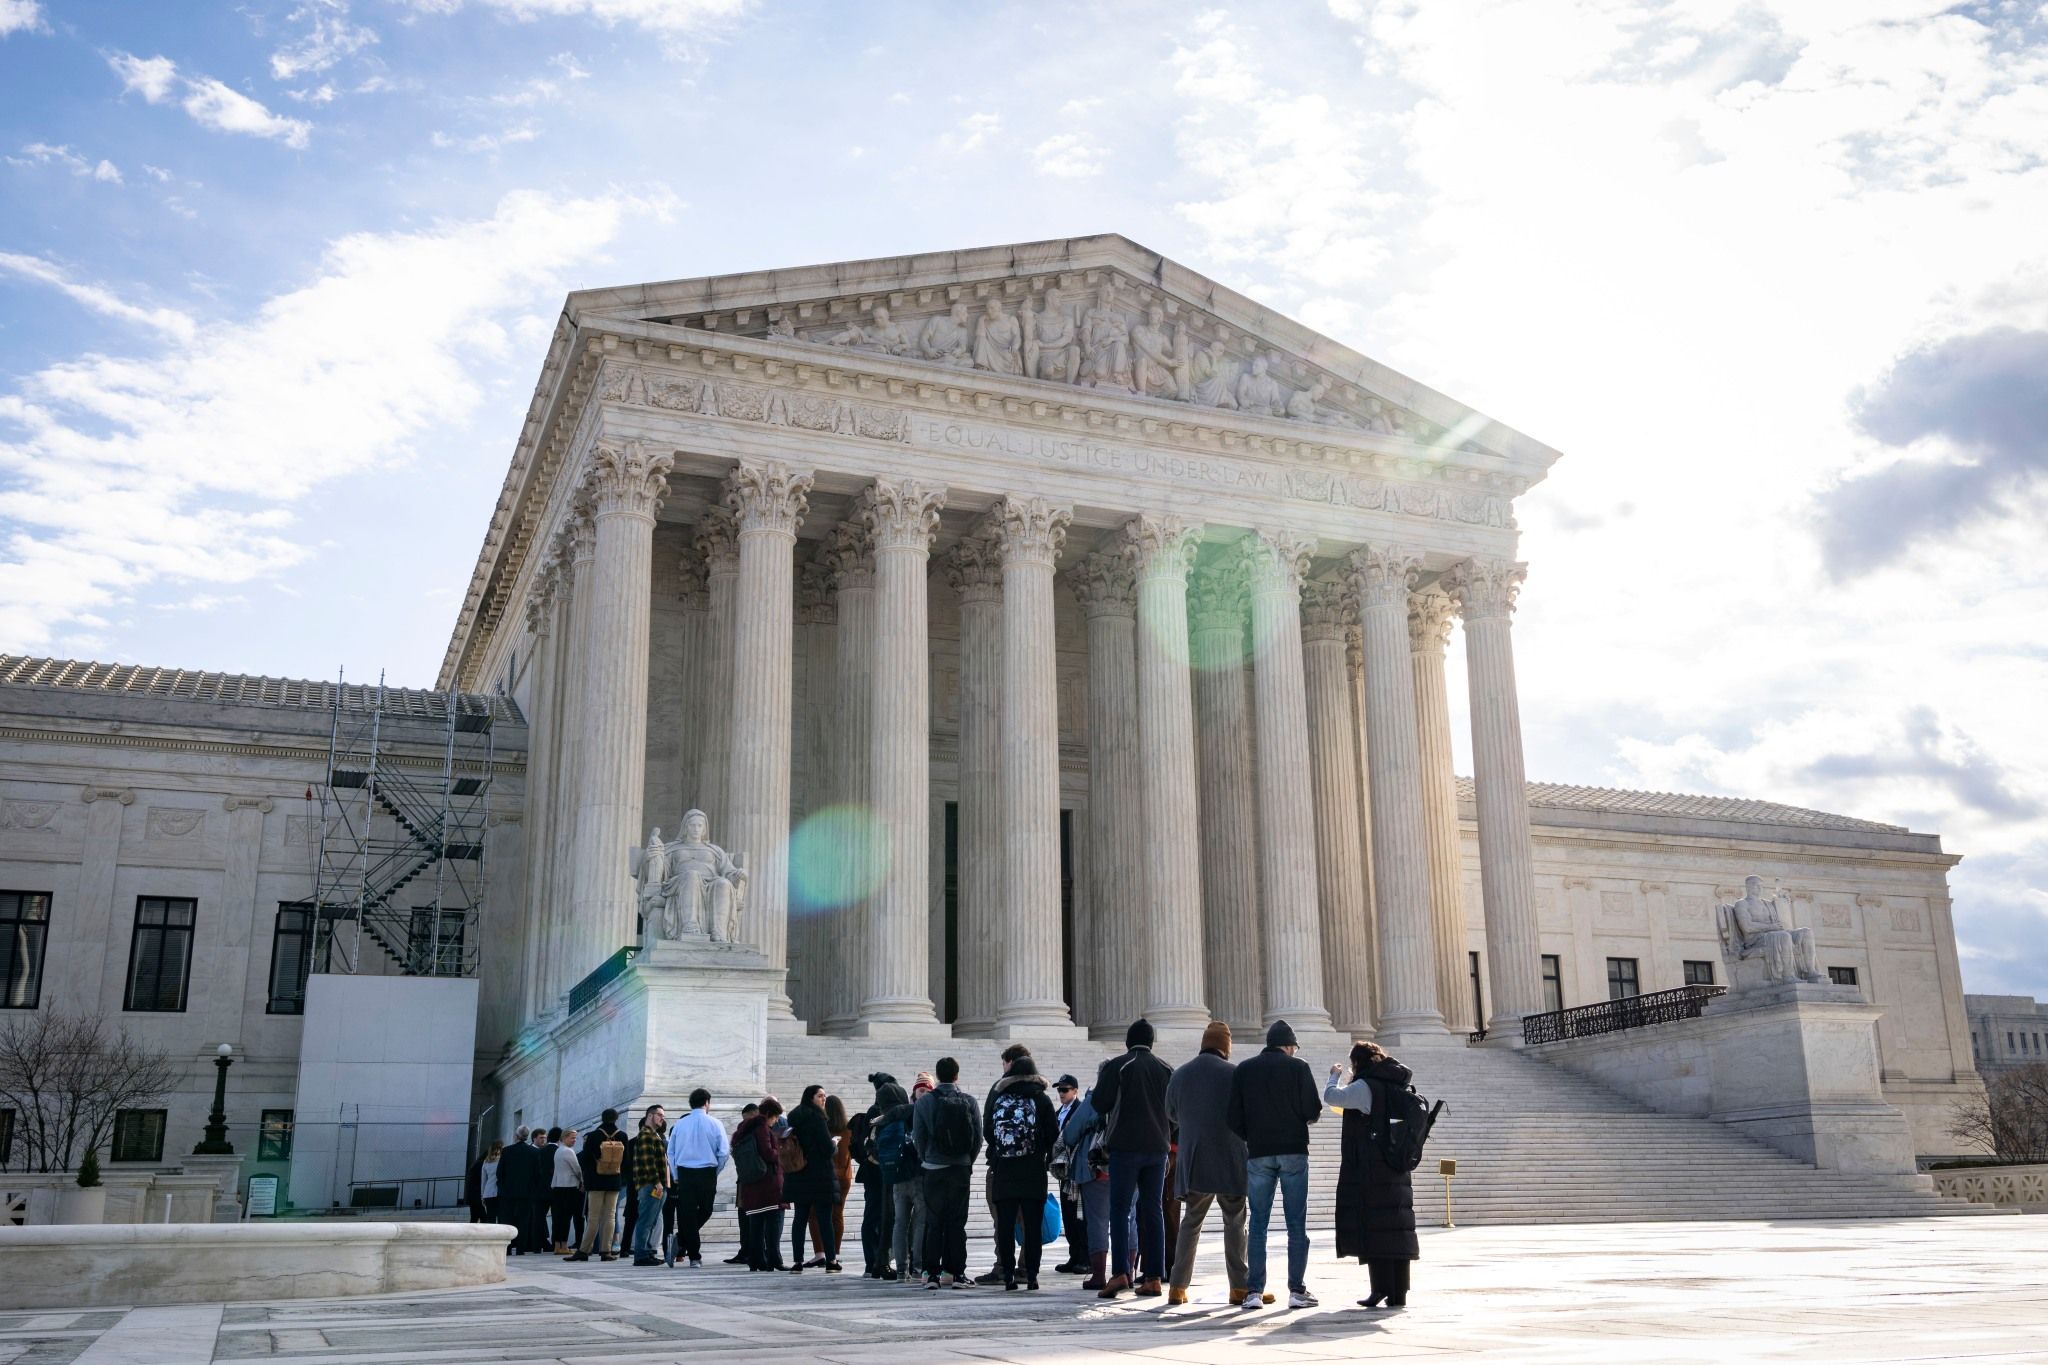 Who is entitled to overtime? A new Supreme Court